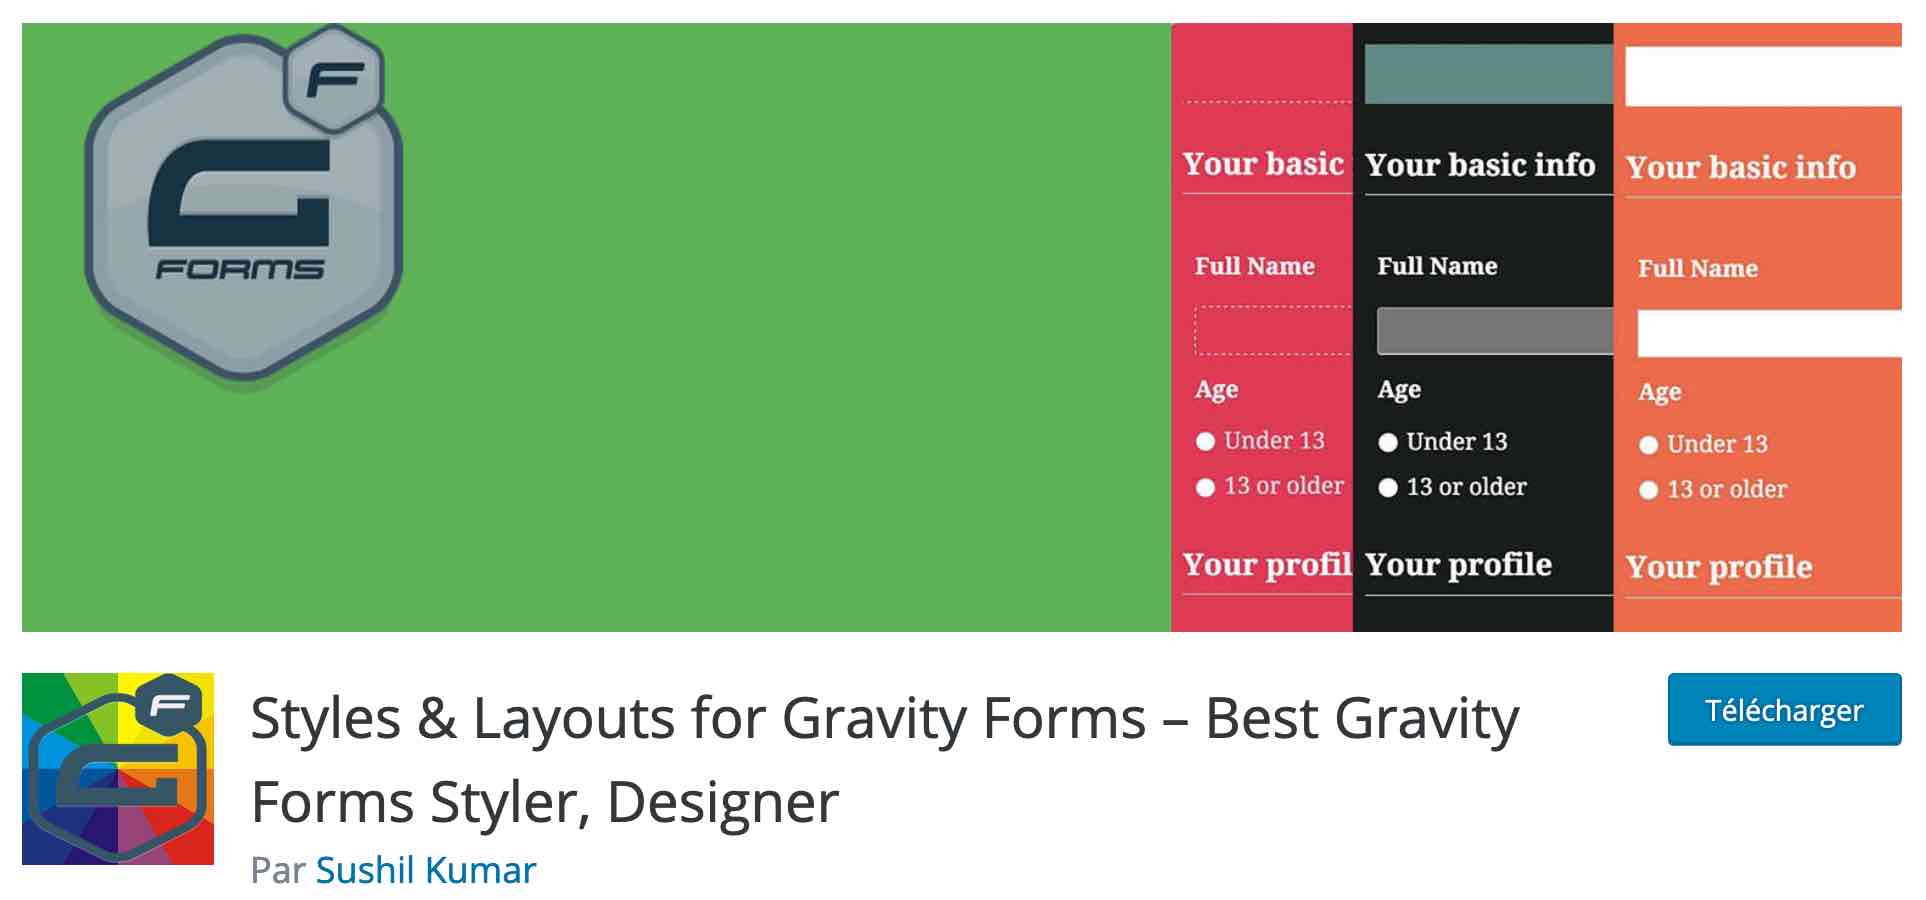 Styles & Layouts for Gravity Forms.